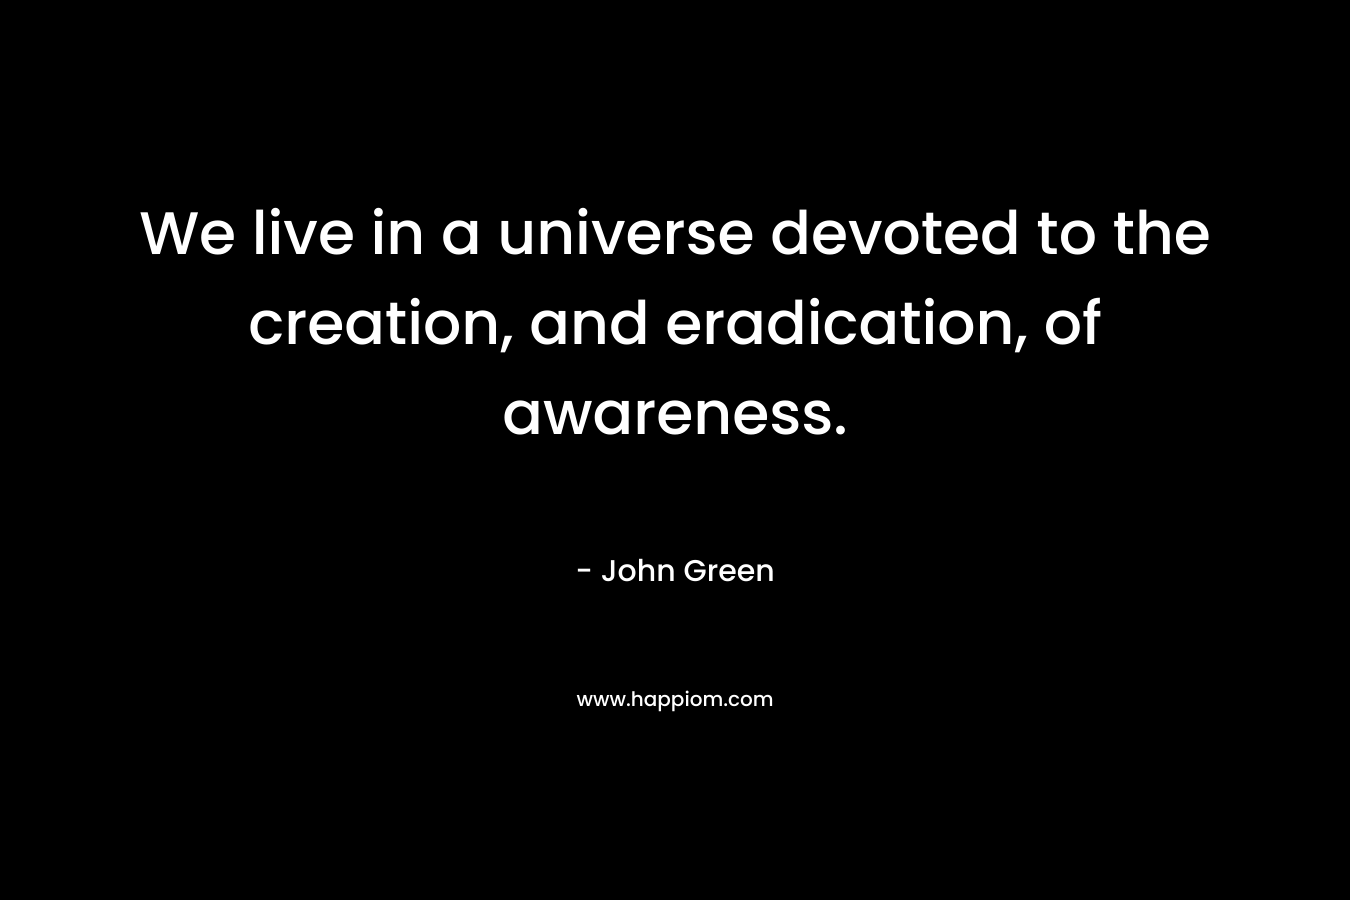 We live in a universe devoted to the creation, and eradication, of awareness.